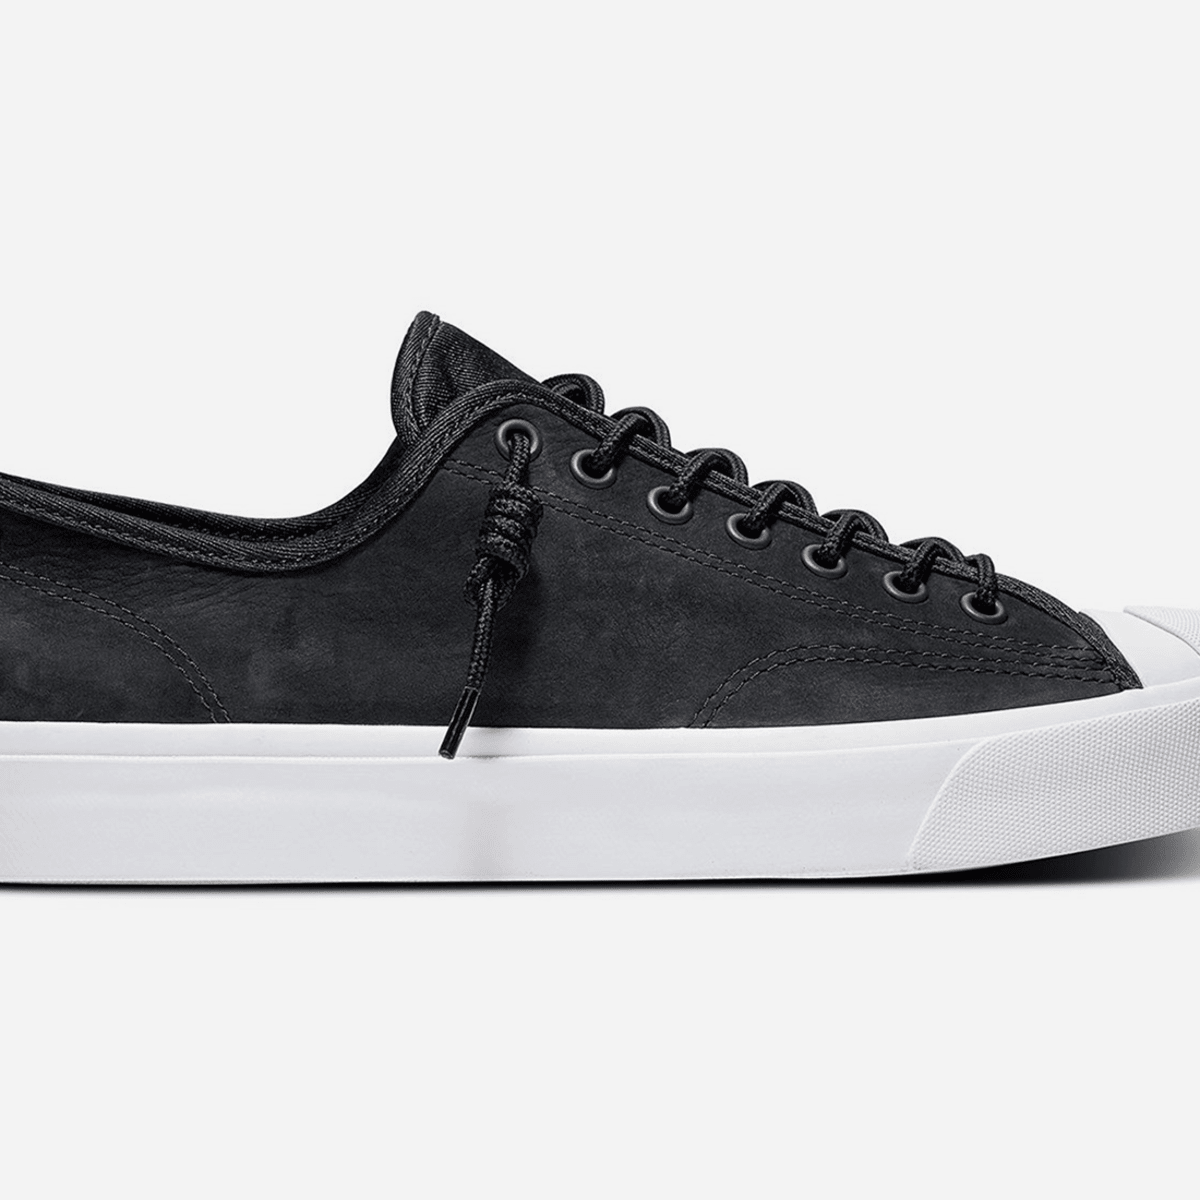 Converse's Jack Purcell Sneaker Gets a 